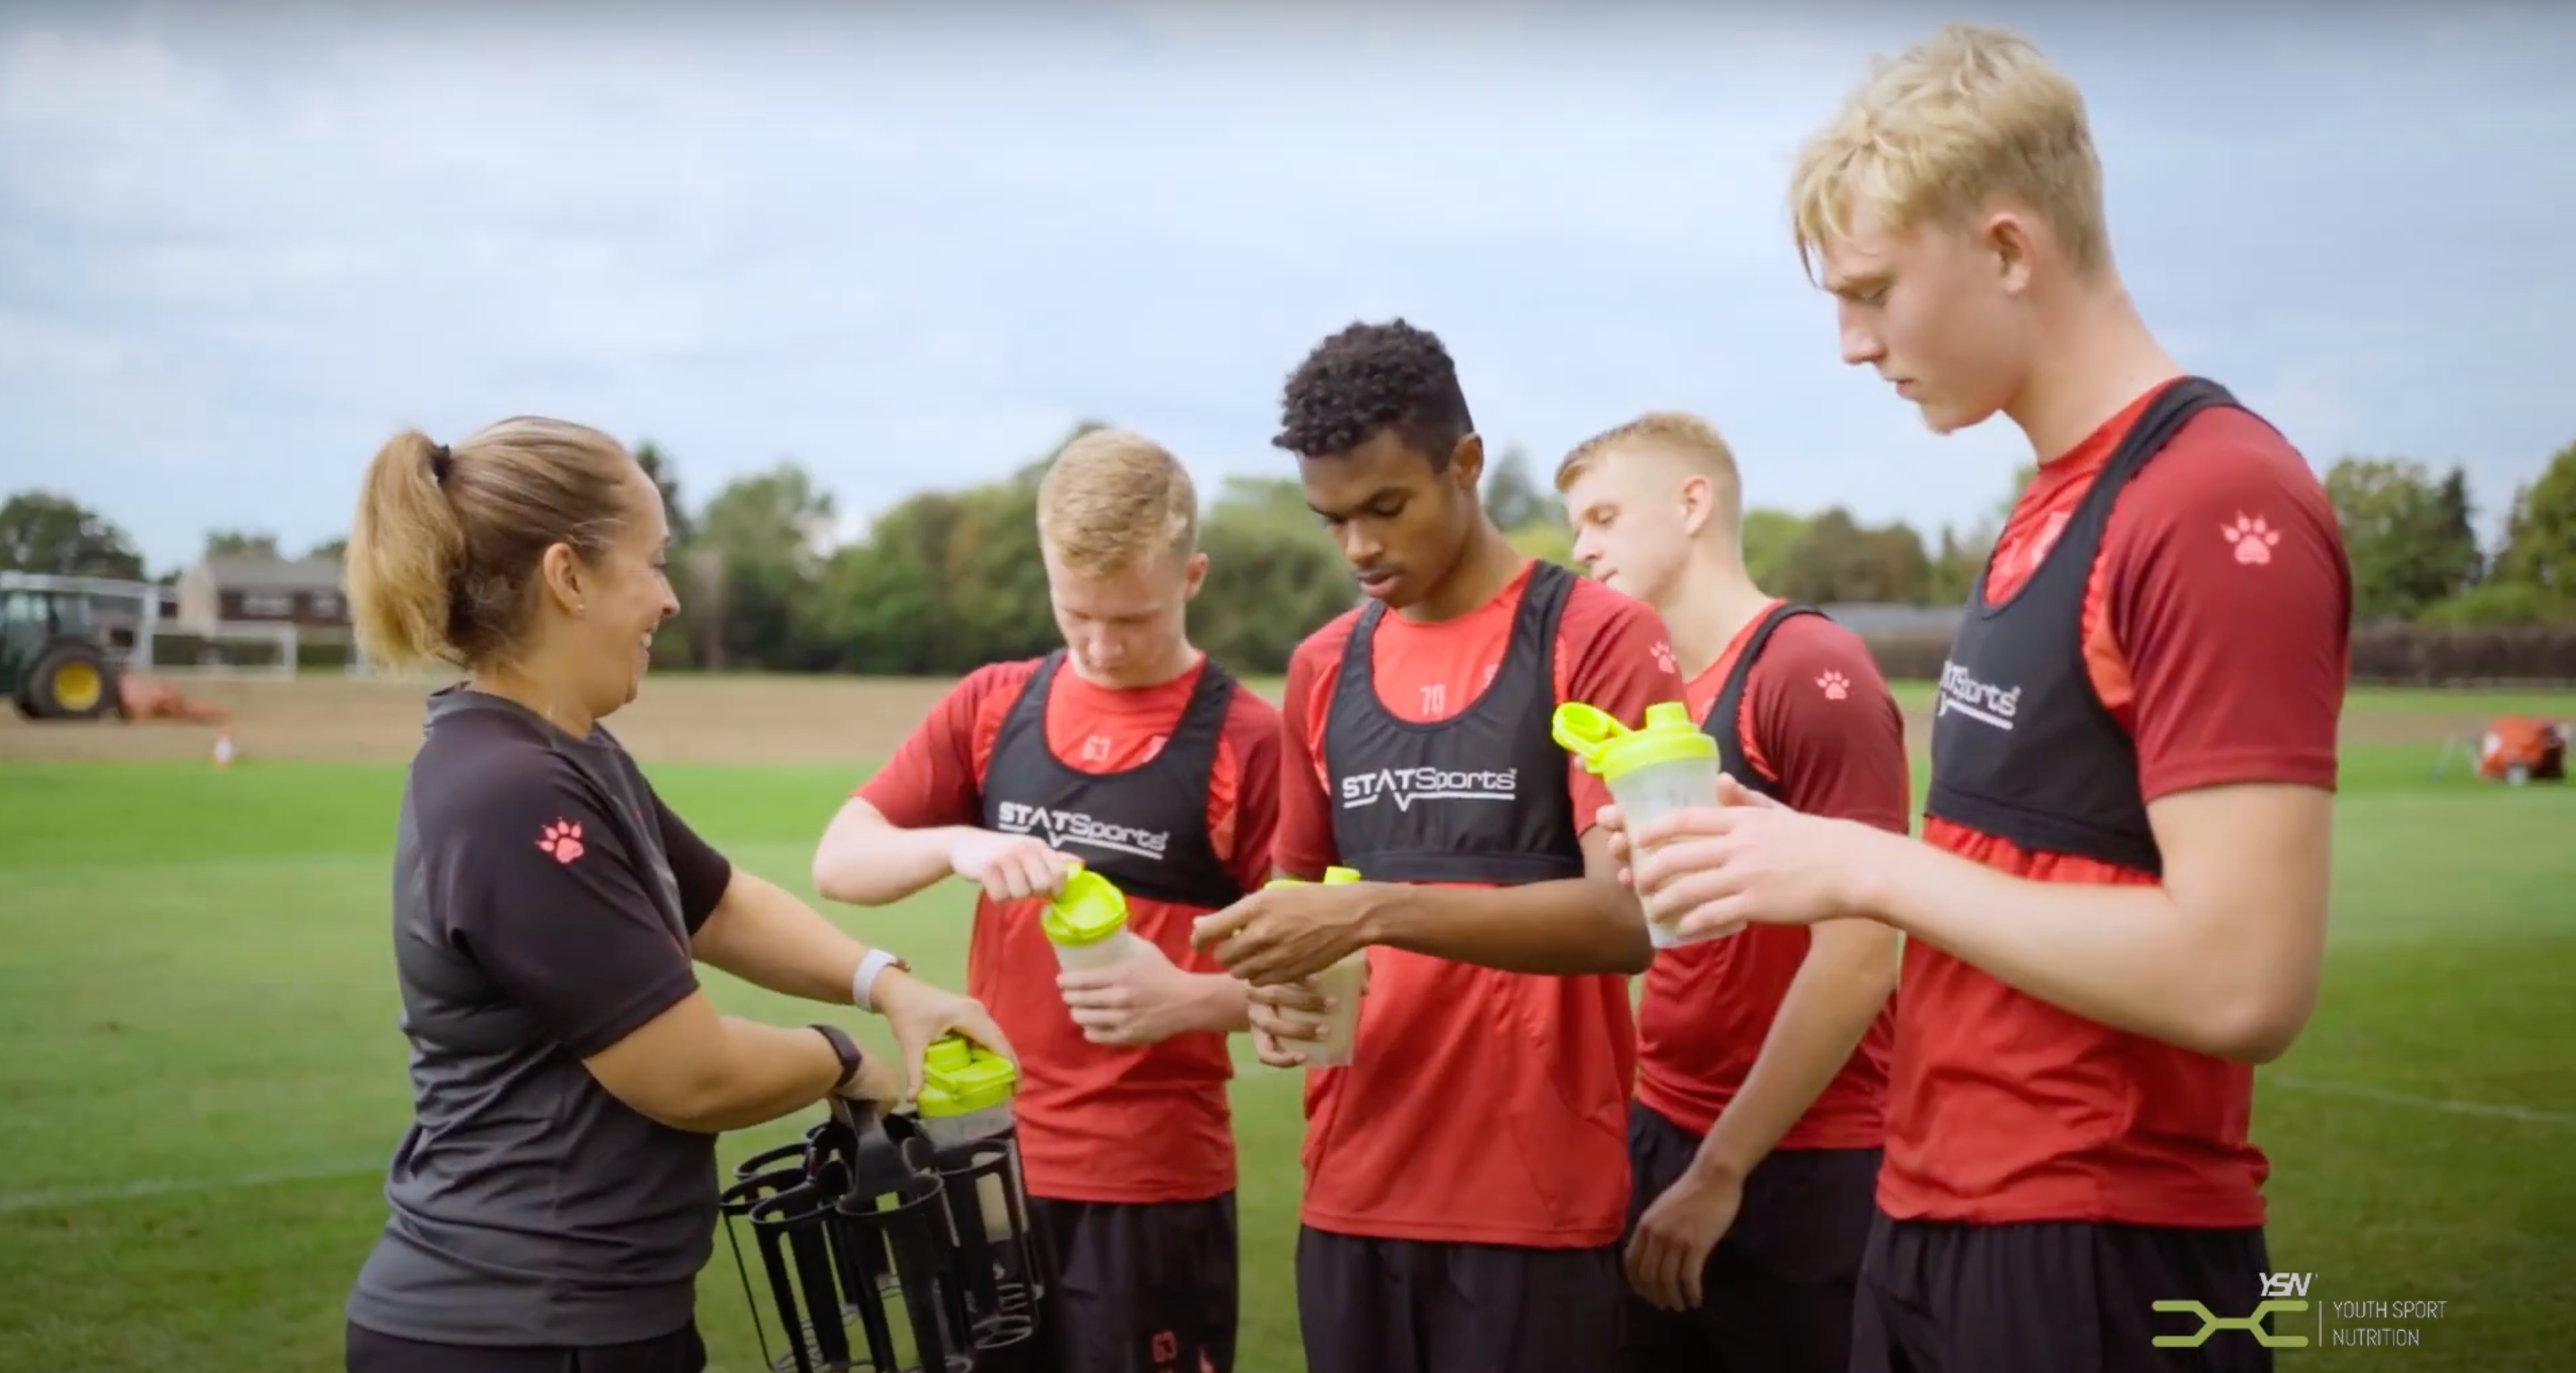 Watford FC Academy Youth Sport Nutrition Nutrition Supplier and Official partner